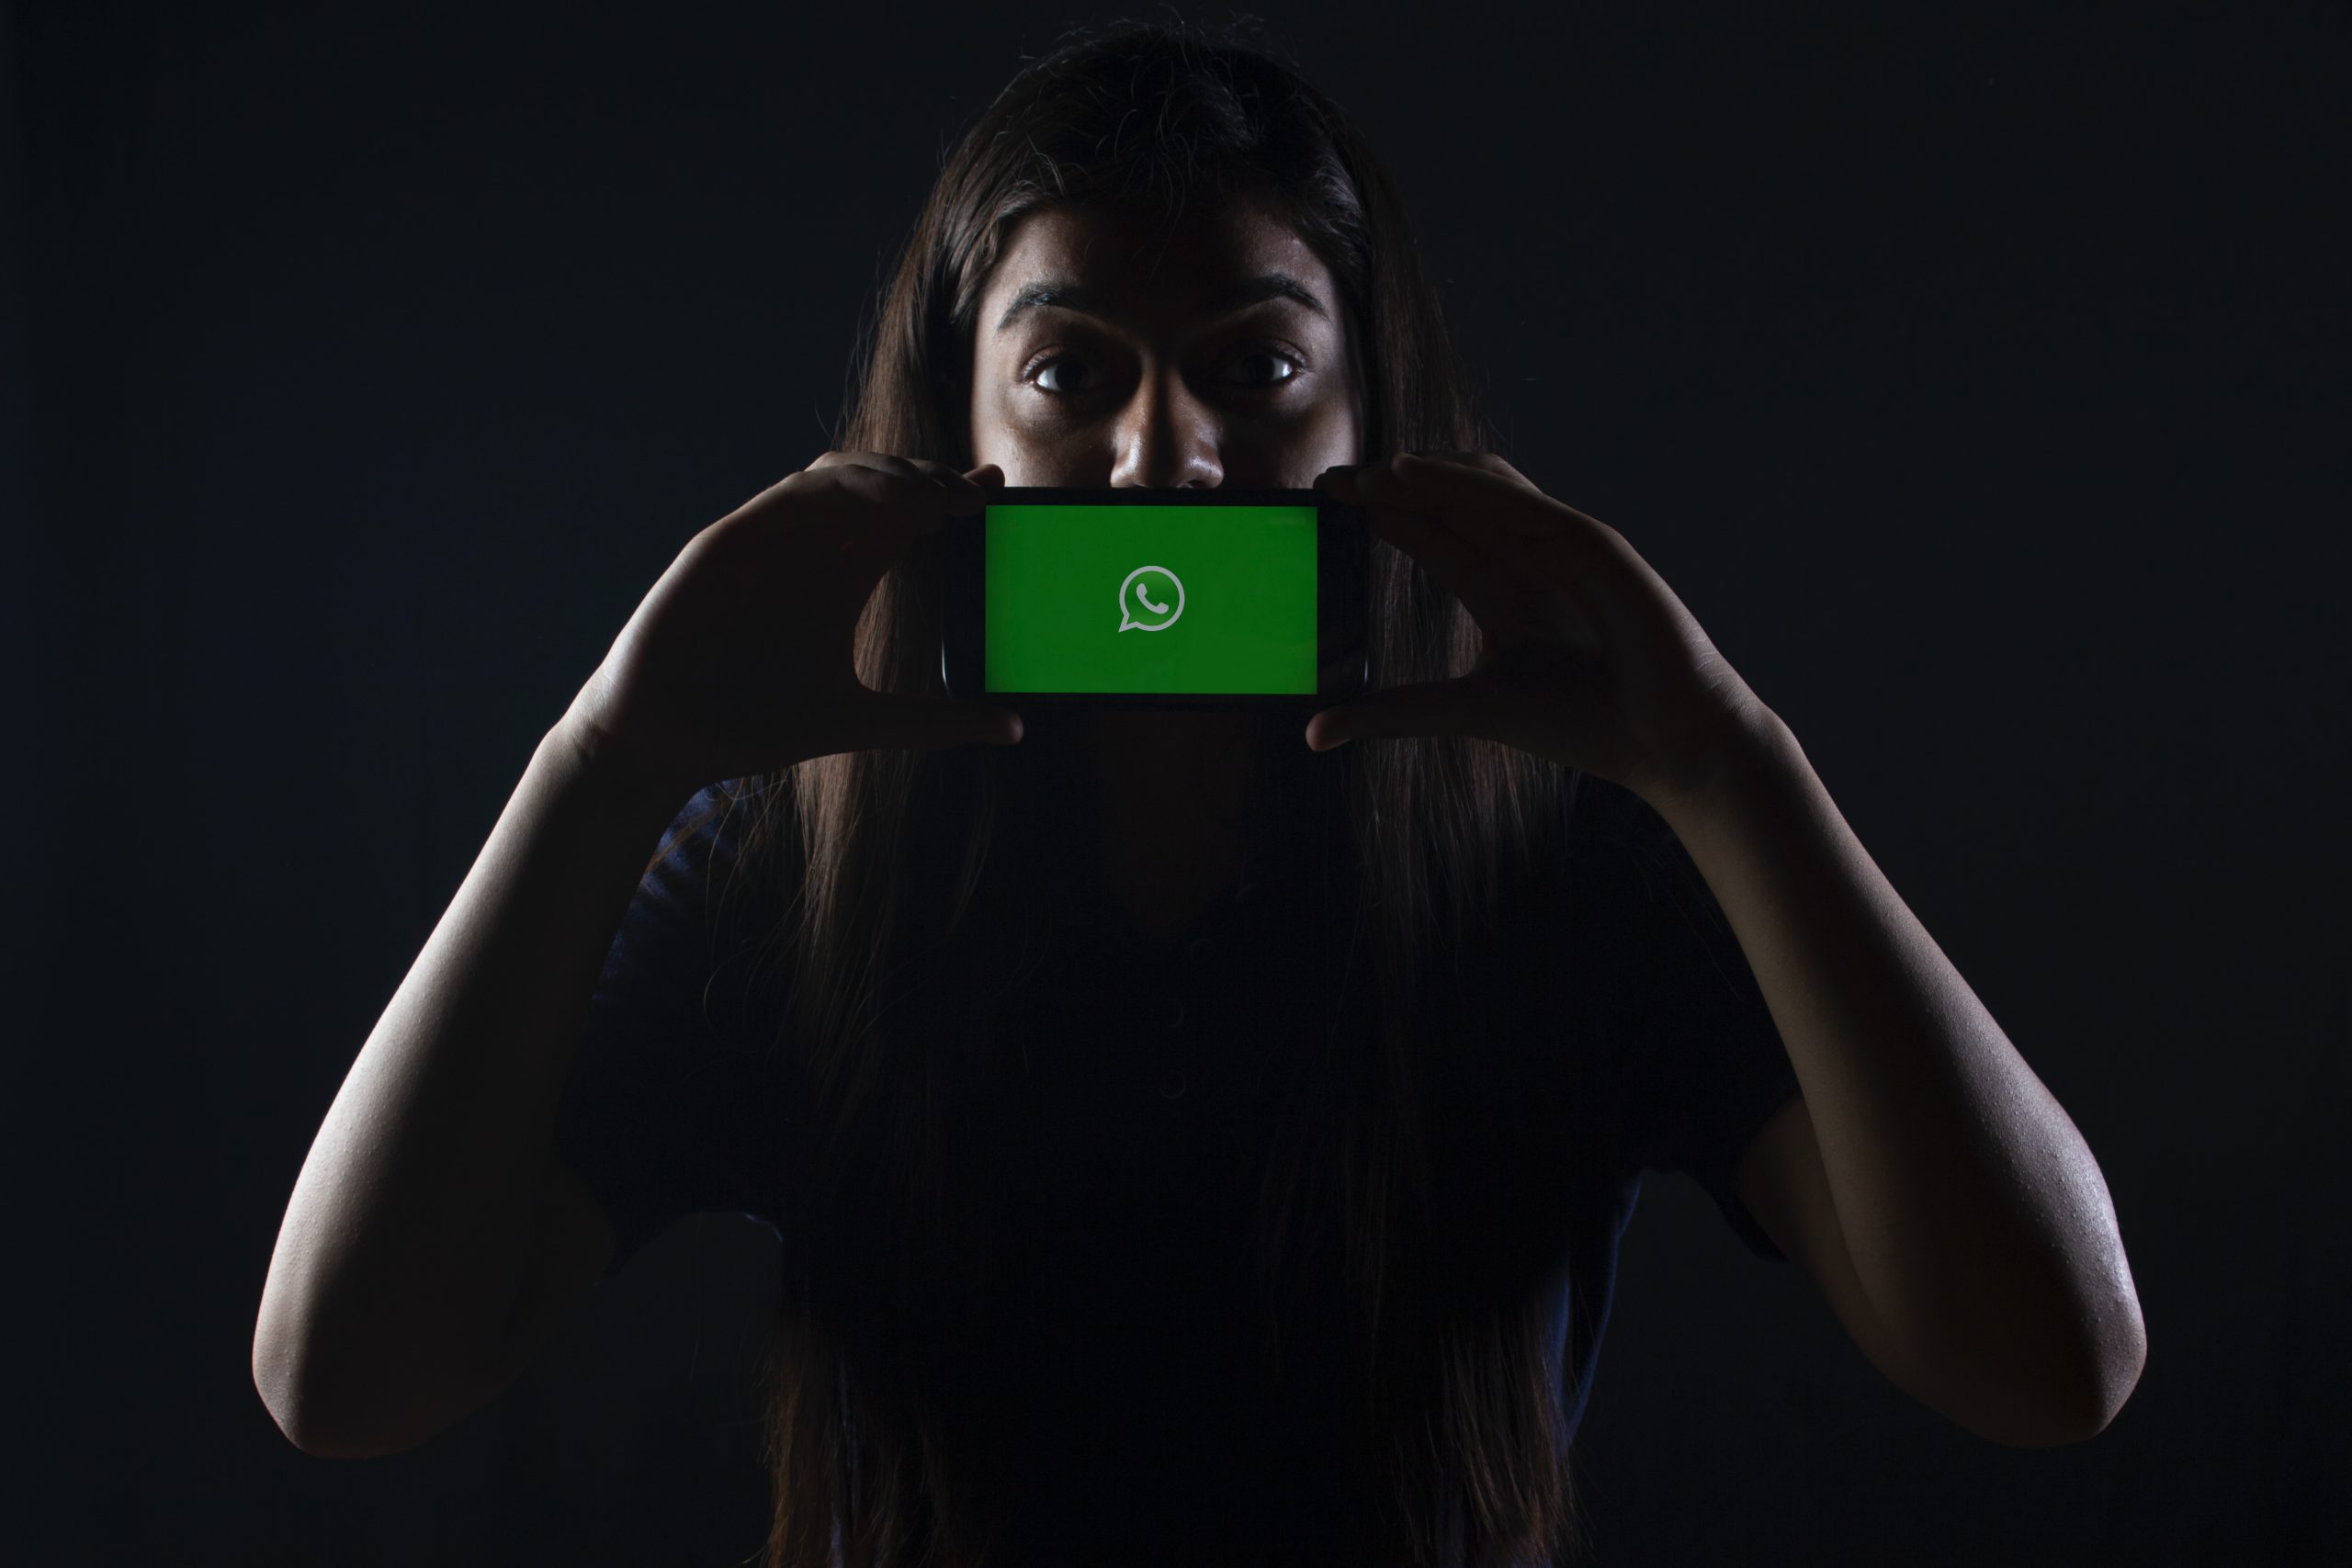 WhatsApp Channels: Bringing Social Media Experience to the App